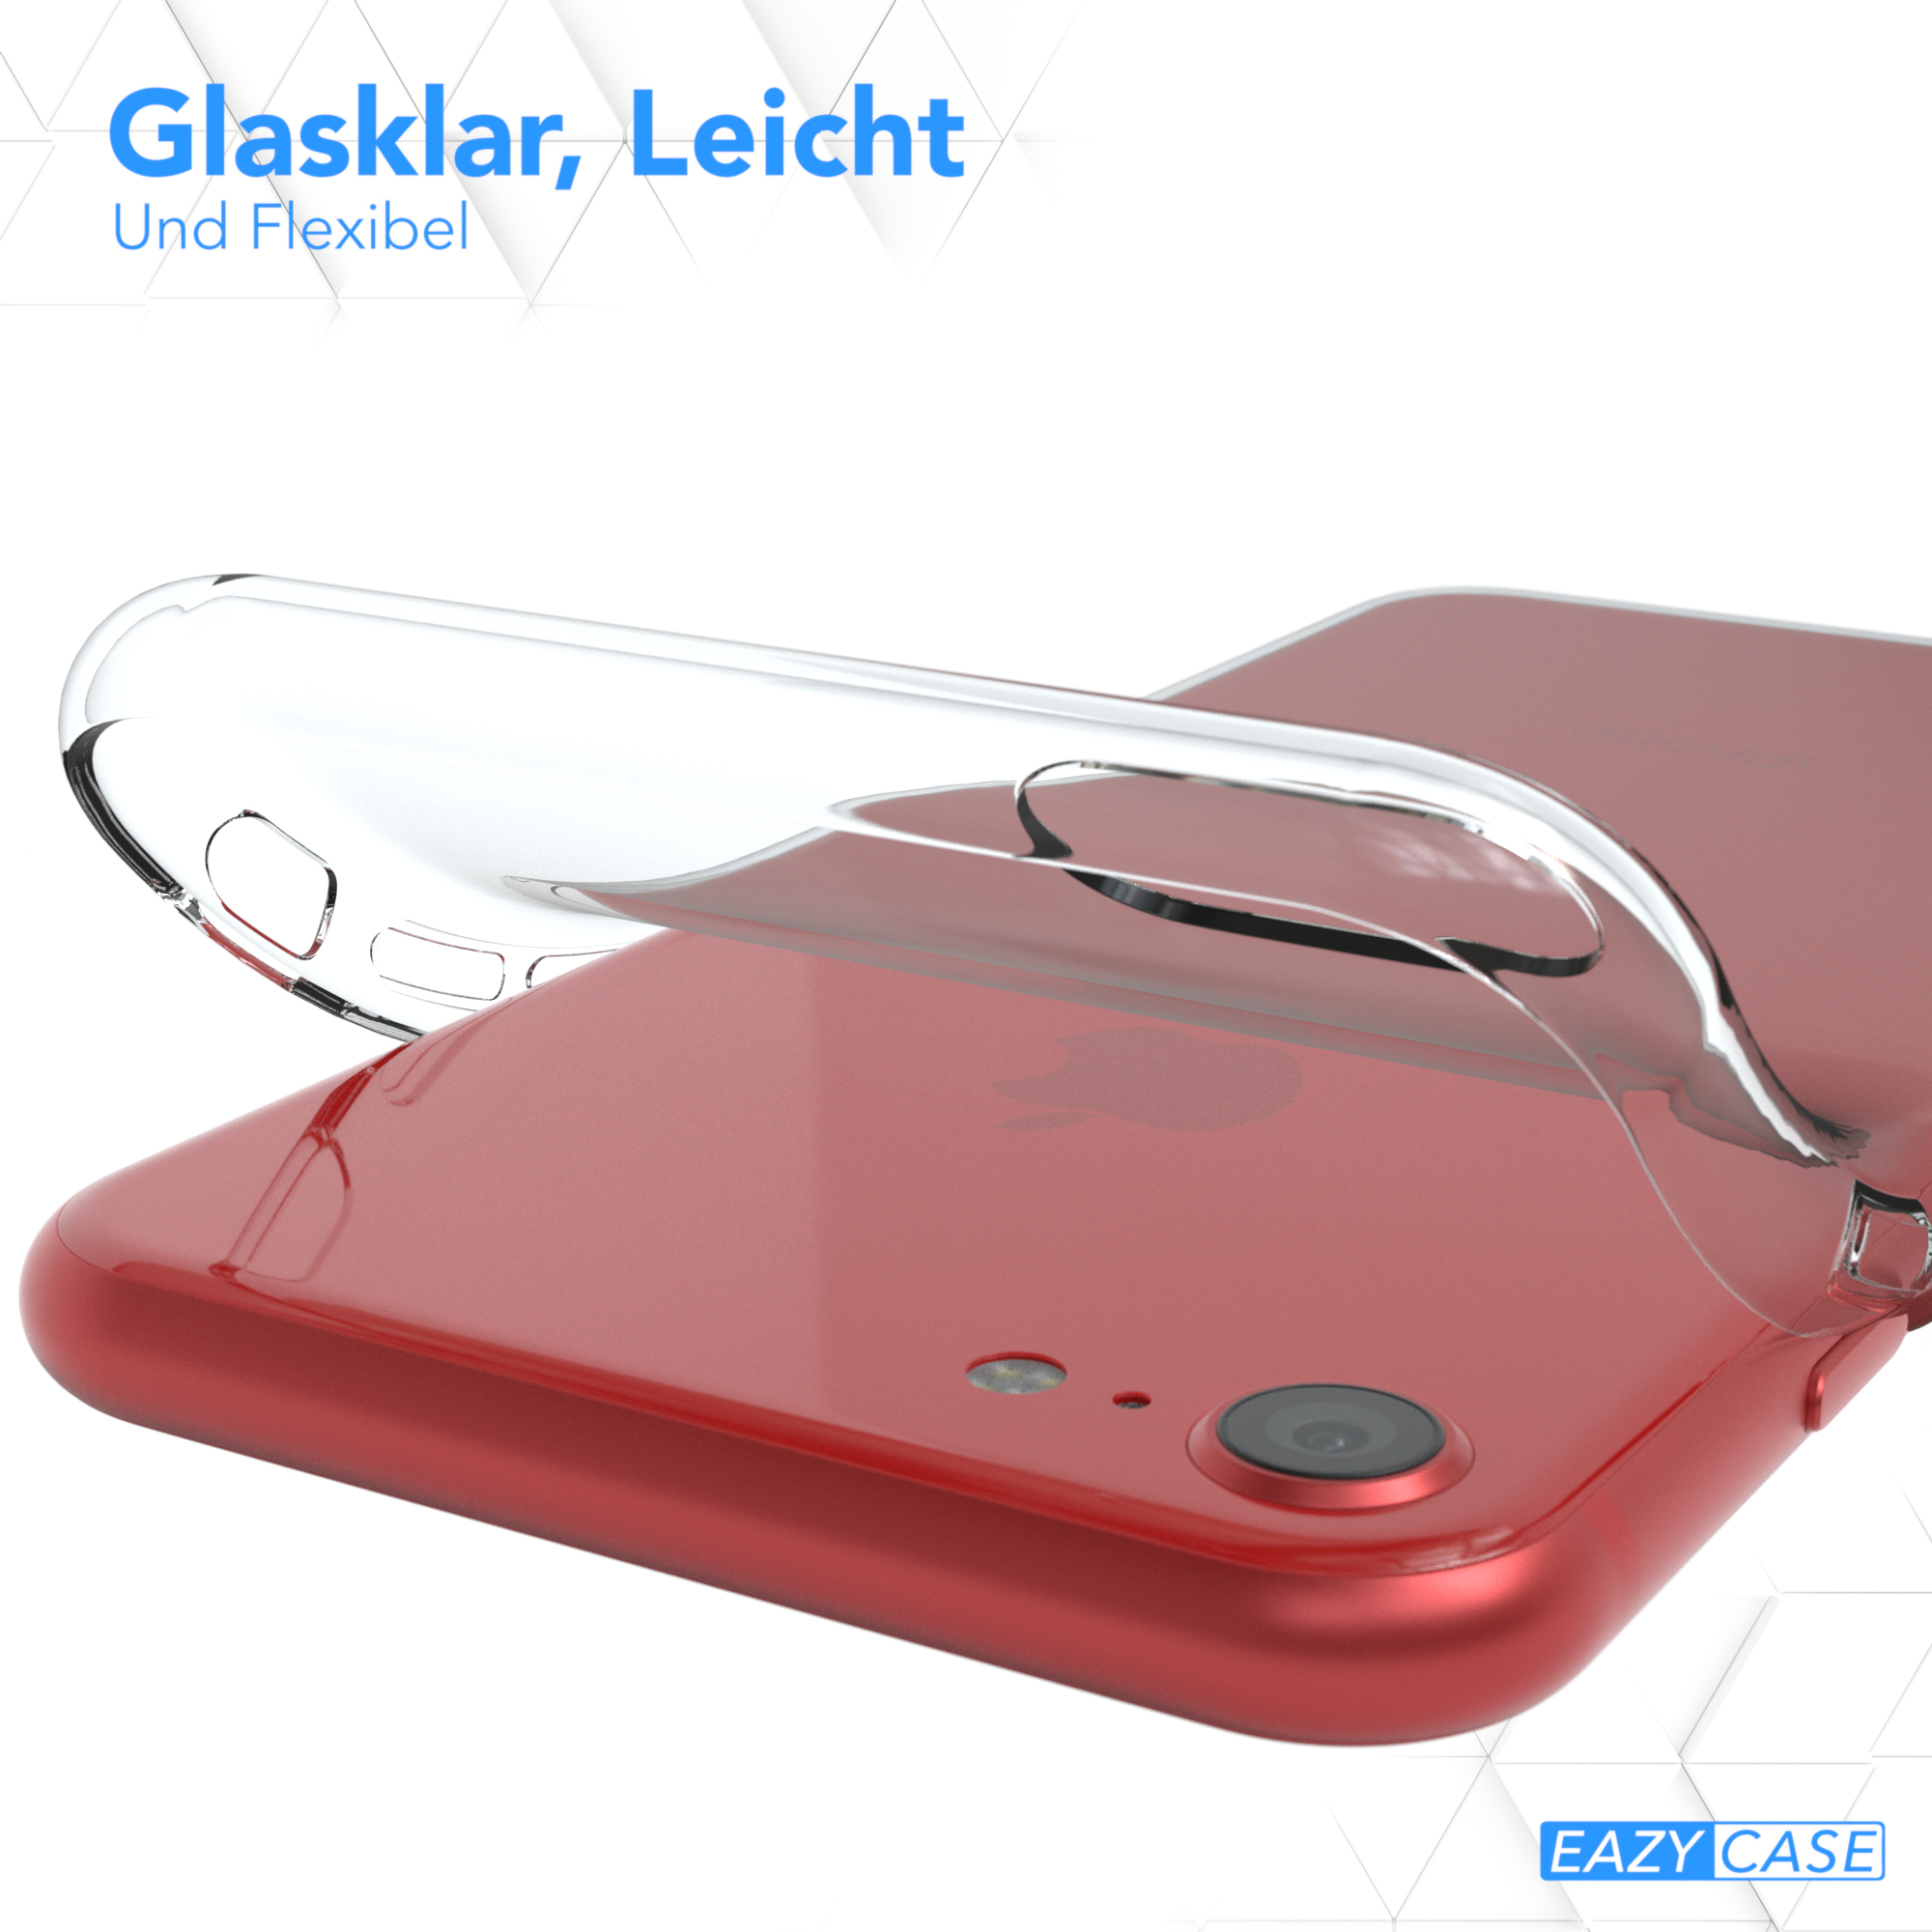 Clear Crystal Klar CASE Apple, Backcover, iPhone AirSpace Pro 11 Max, Structure, EAZY